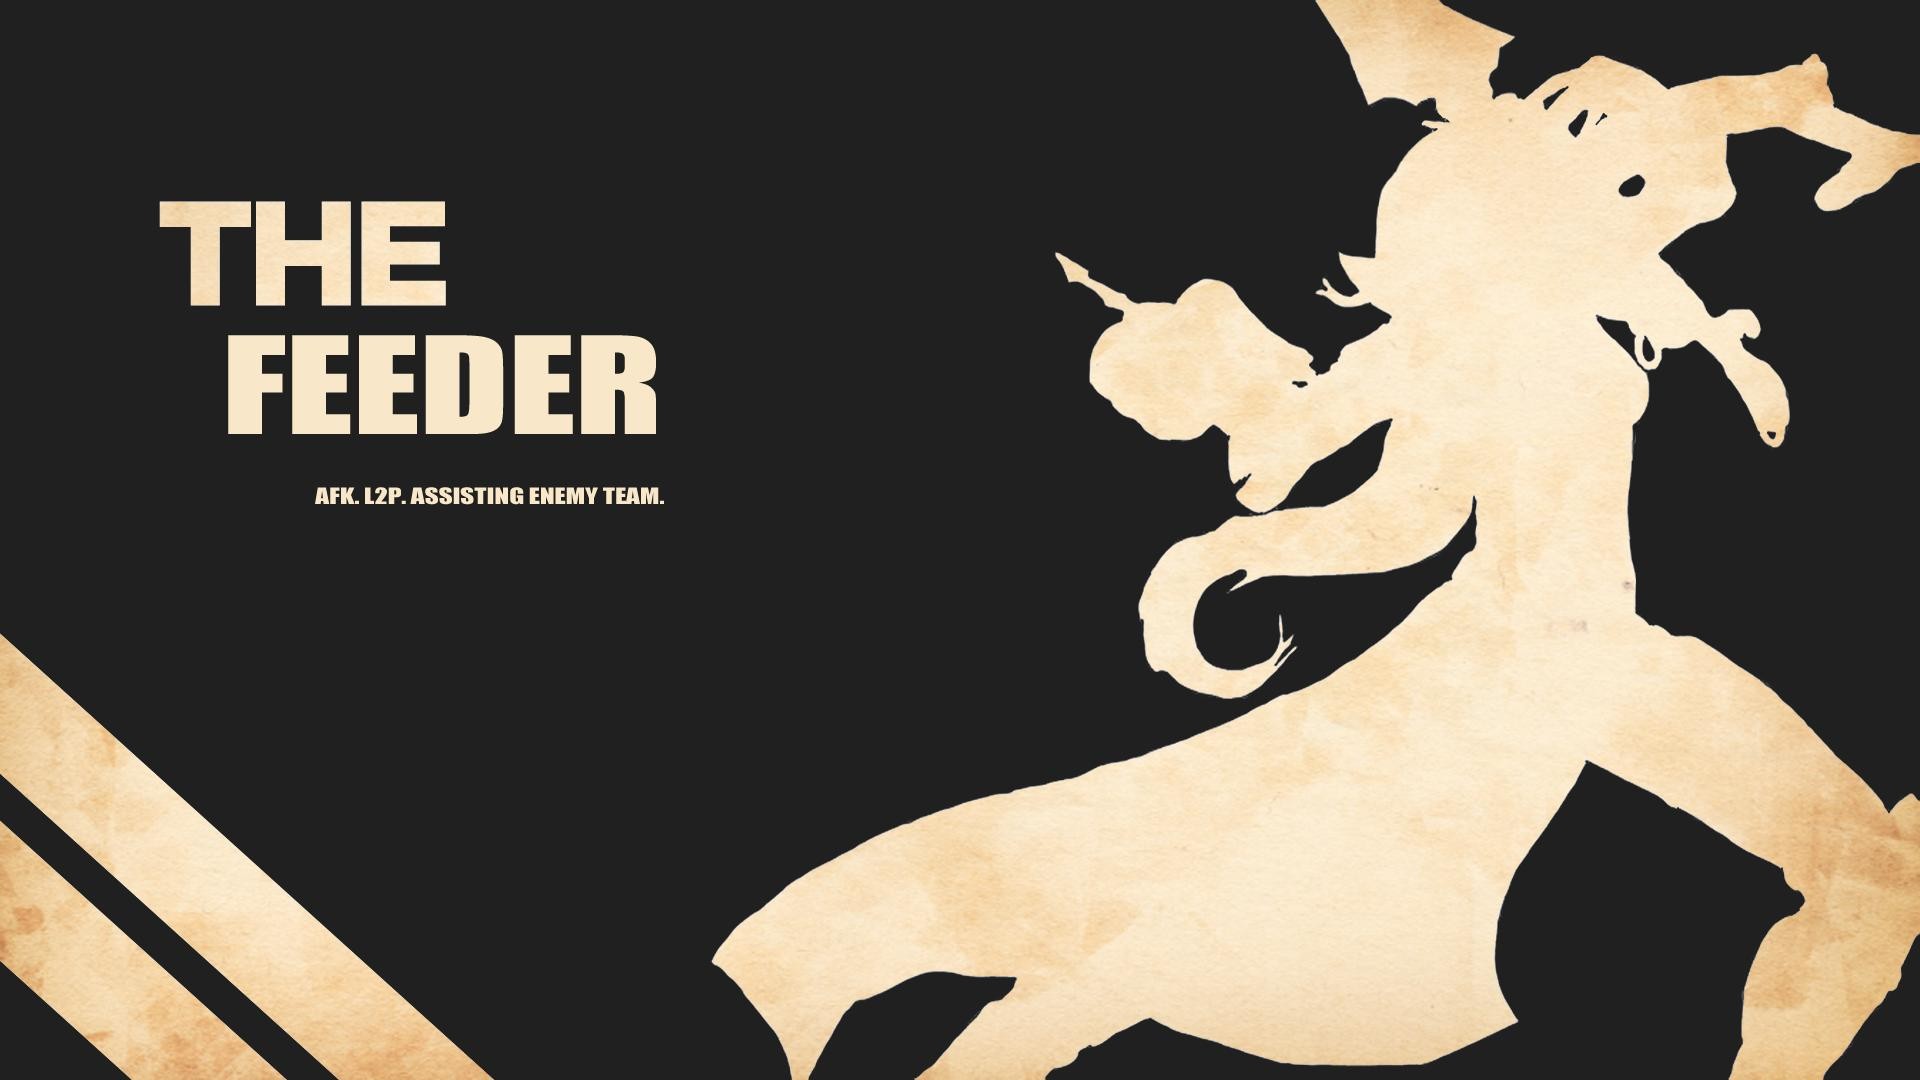 1920x1080 League of Legends Wallpaper - The Feeder The Feeder: AFK. L2P. Assisting  Enemy Team.